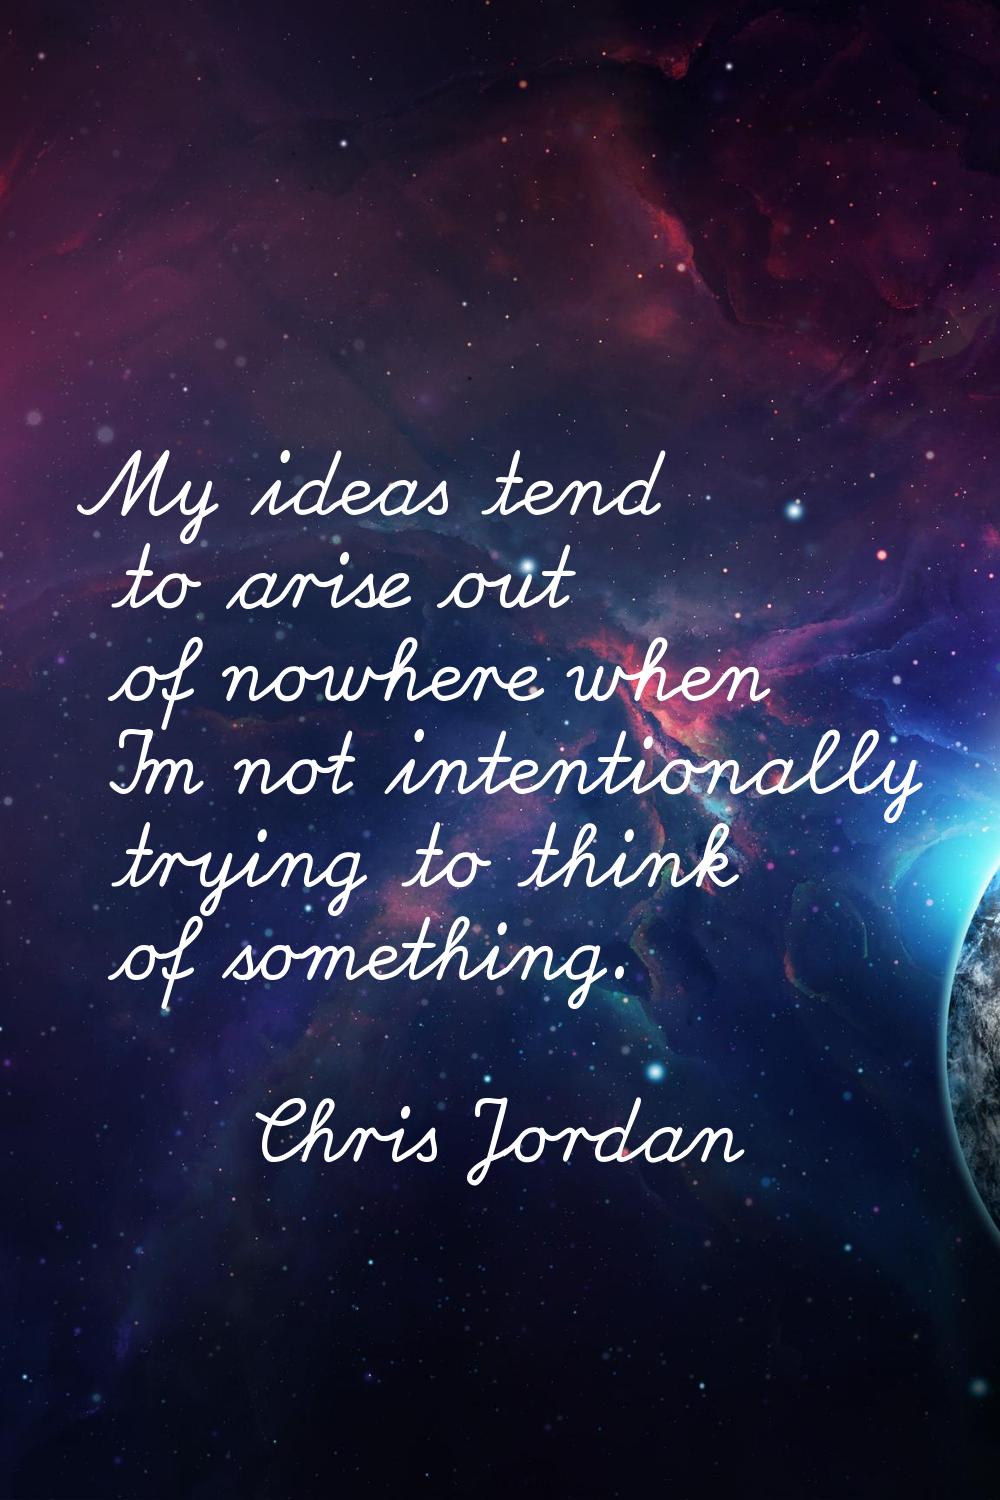 My ideas tend to arise out of nowhere when I'm not intentionally trying to think of something.